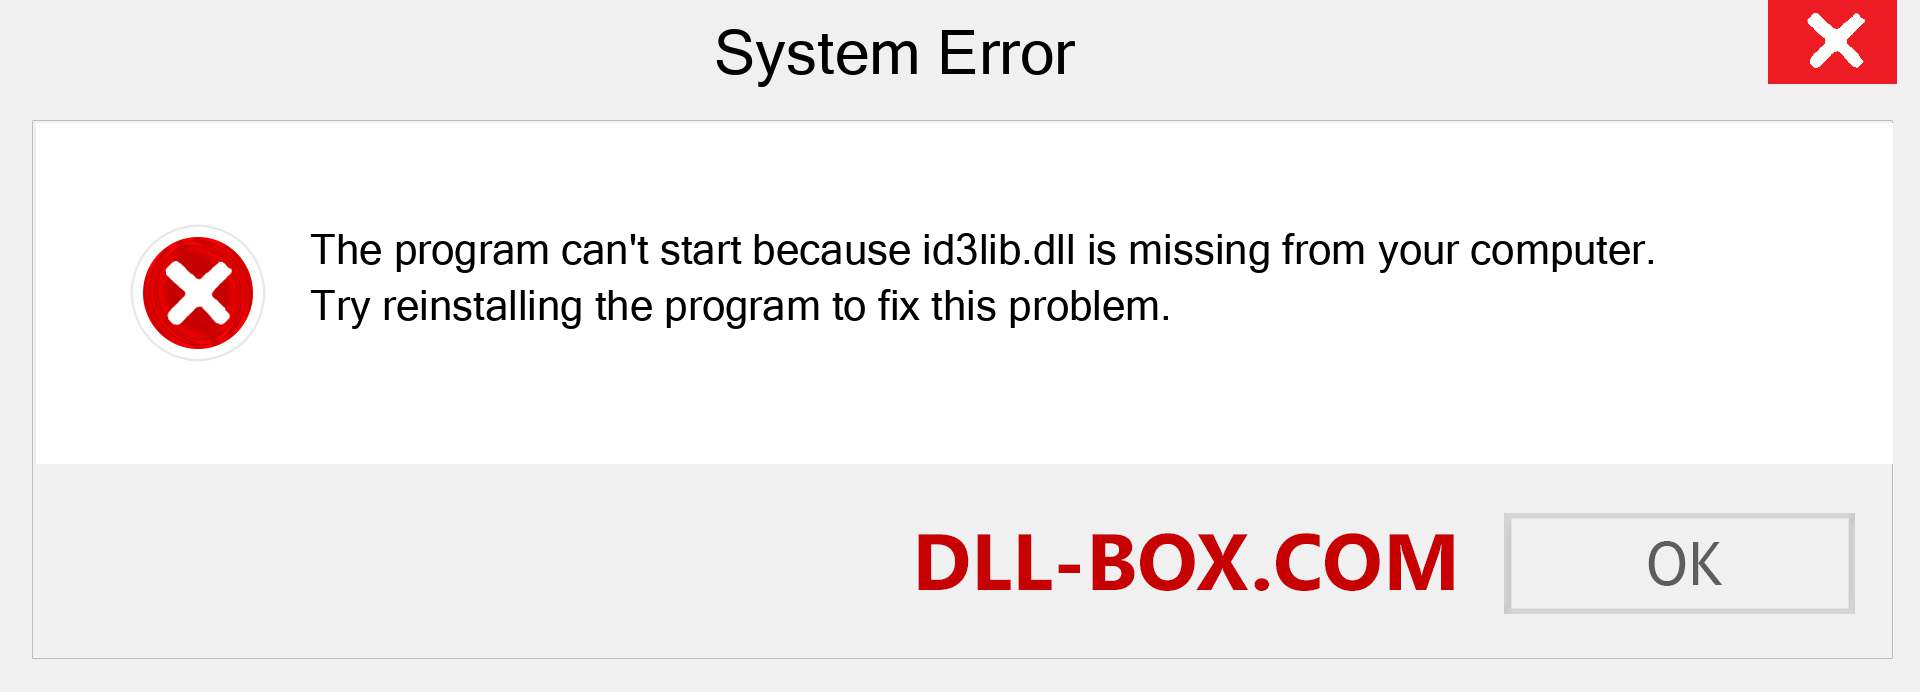  id3lib.dll file is missing?. Download for Windows 7, 8, 10 - Fix  id3lib dll Missing Error on Windows, photos, images